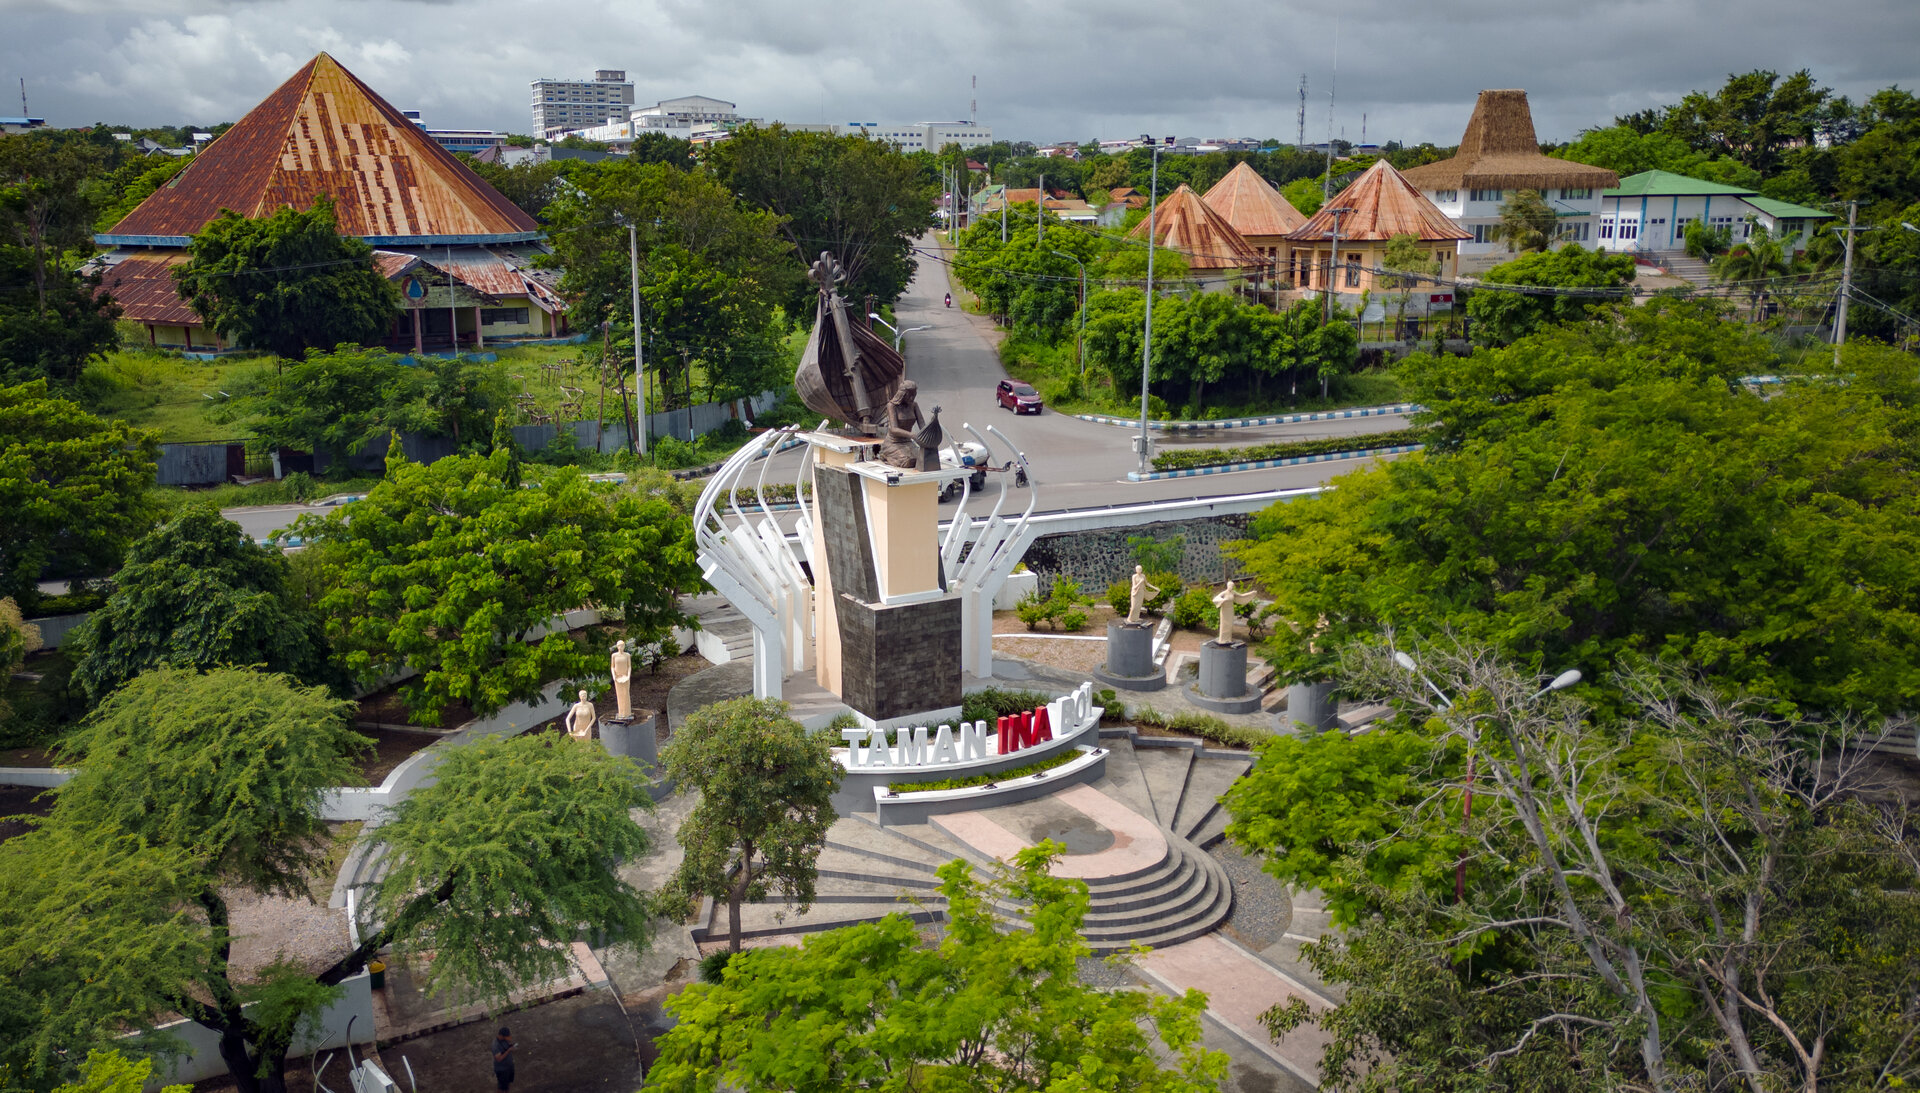 Ina Bo’i Park, meaning ‘beloved mother’ in Rotinese, is a monument dedicated to the mothers of Kupang. Six smaller statues “dance” around the mother statue, who is depicted playing the Rotinese palm harp.